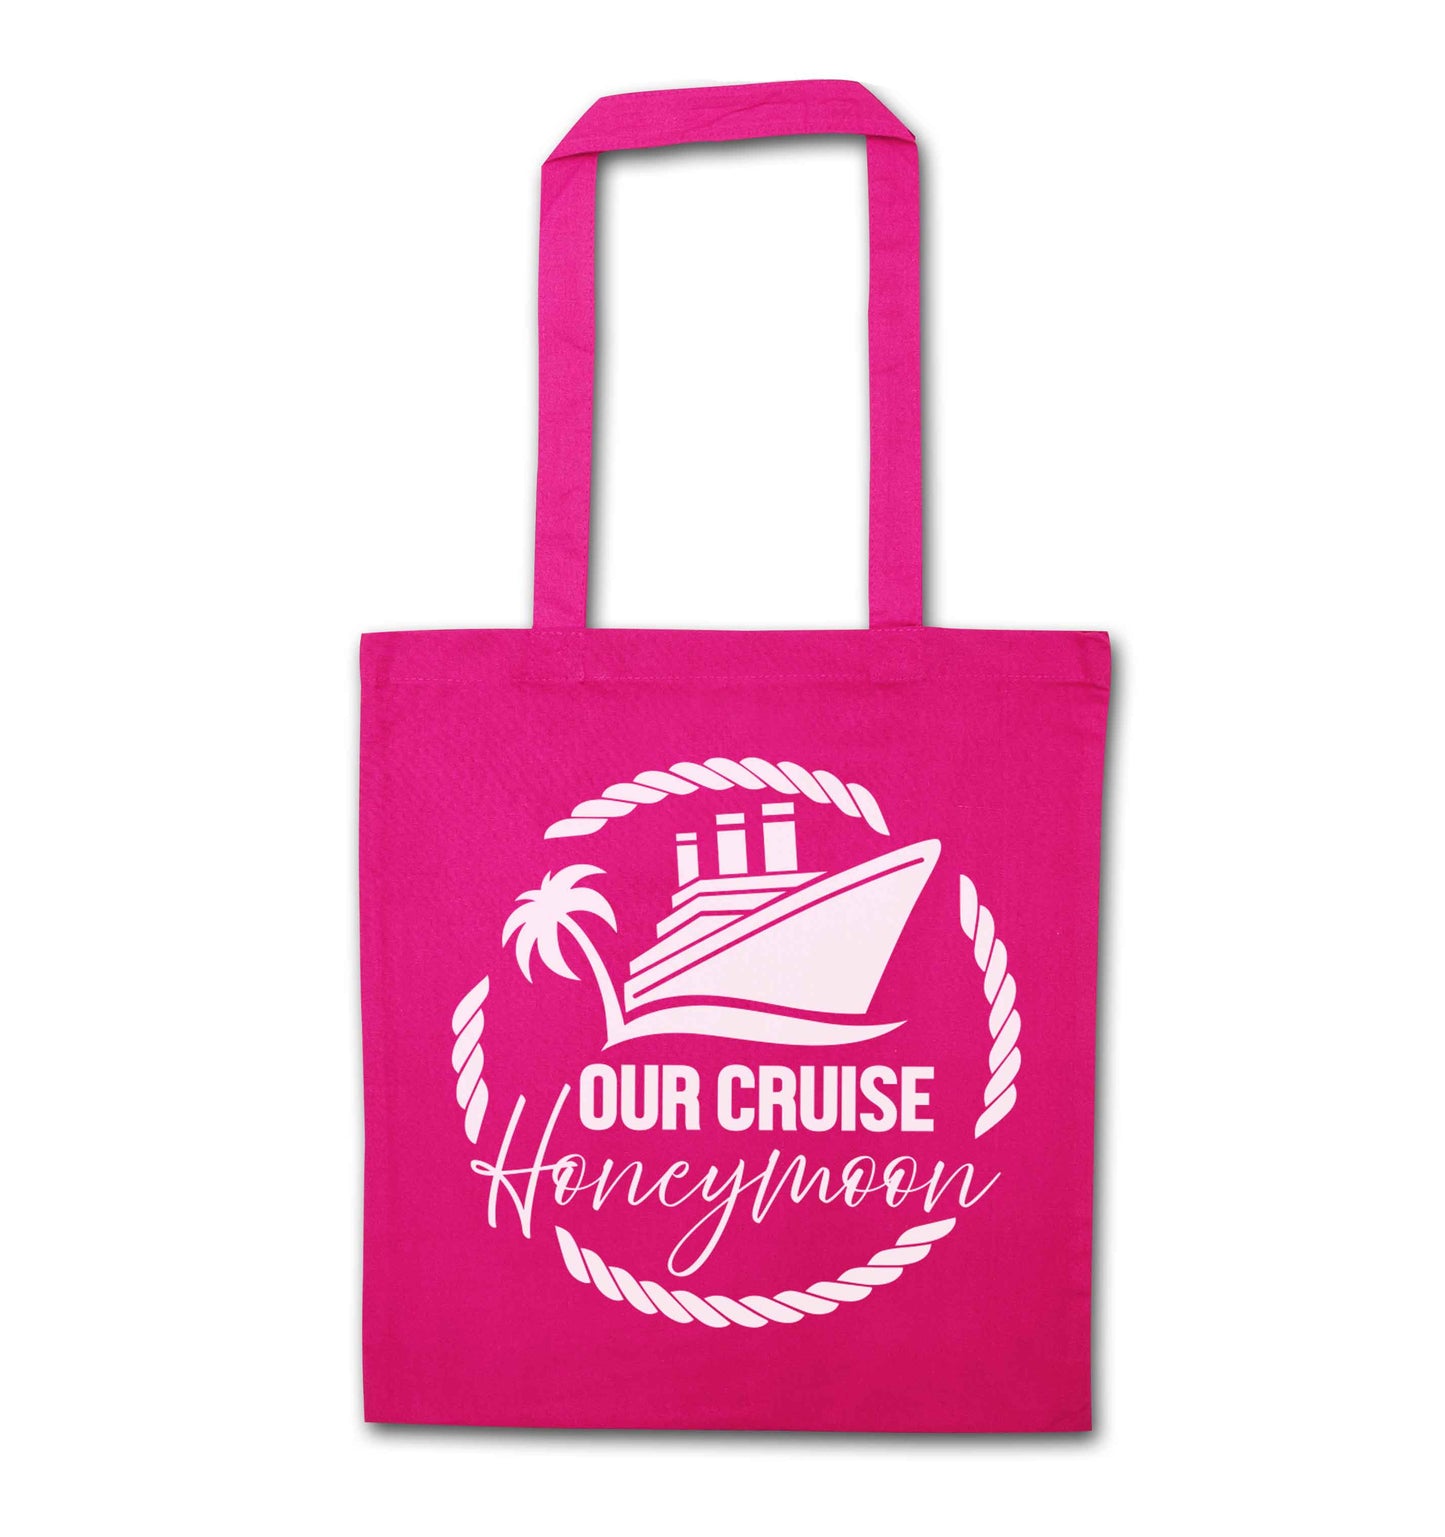 Our cruise honeymoon pink tote bag